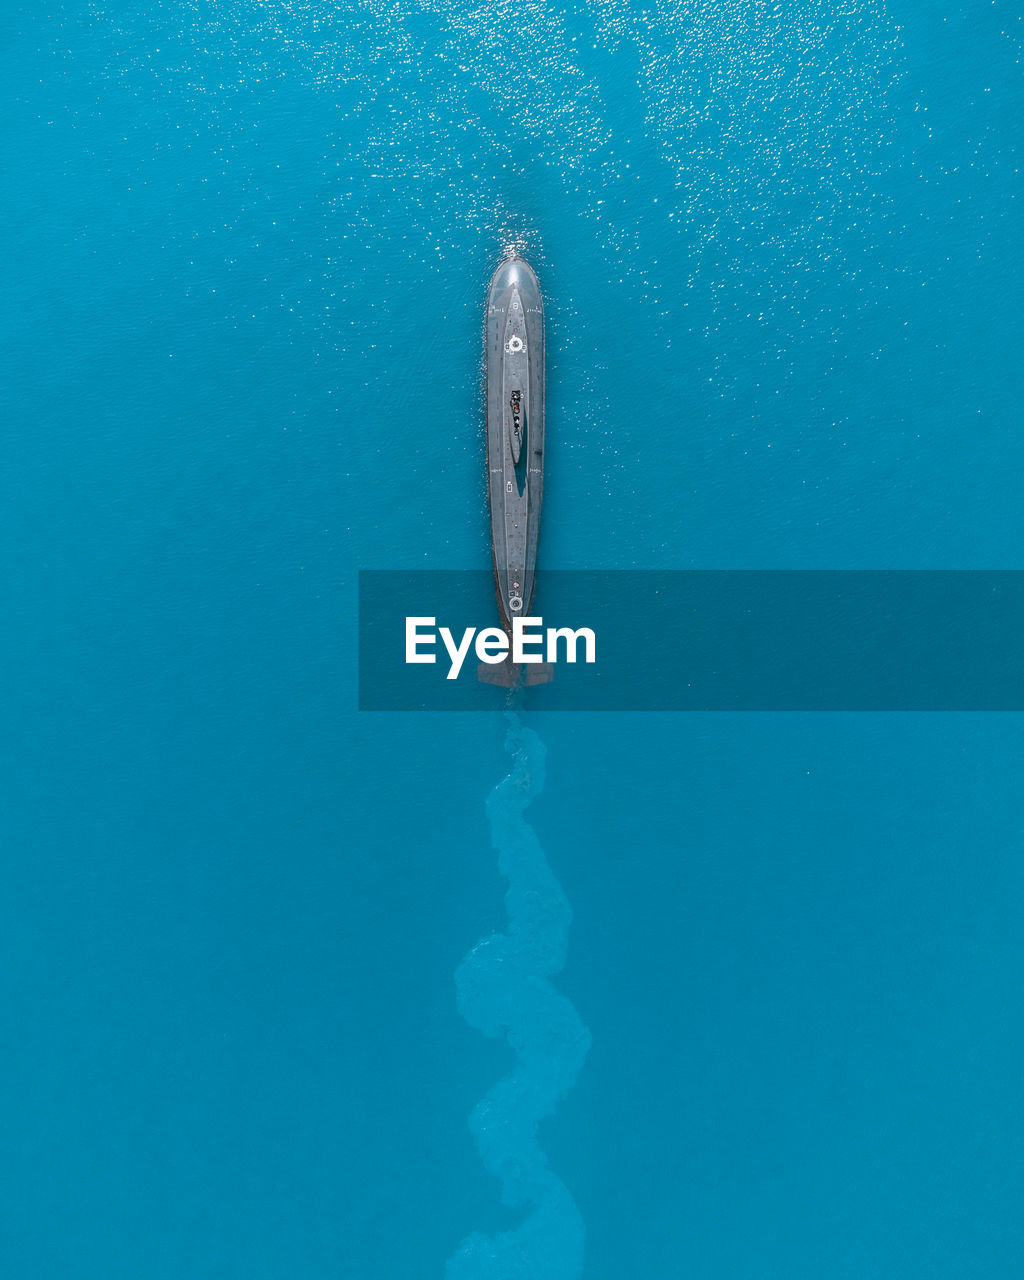 Aerial view of submarine in sea